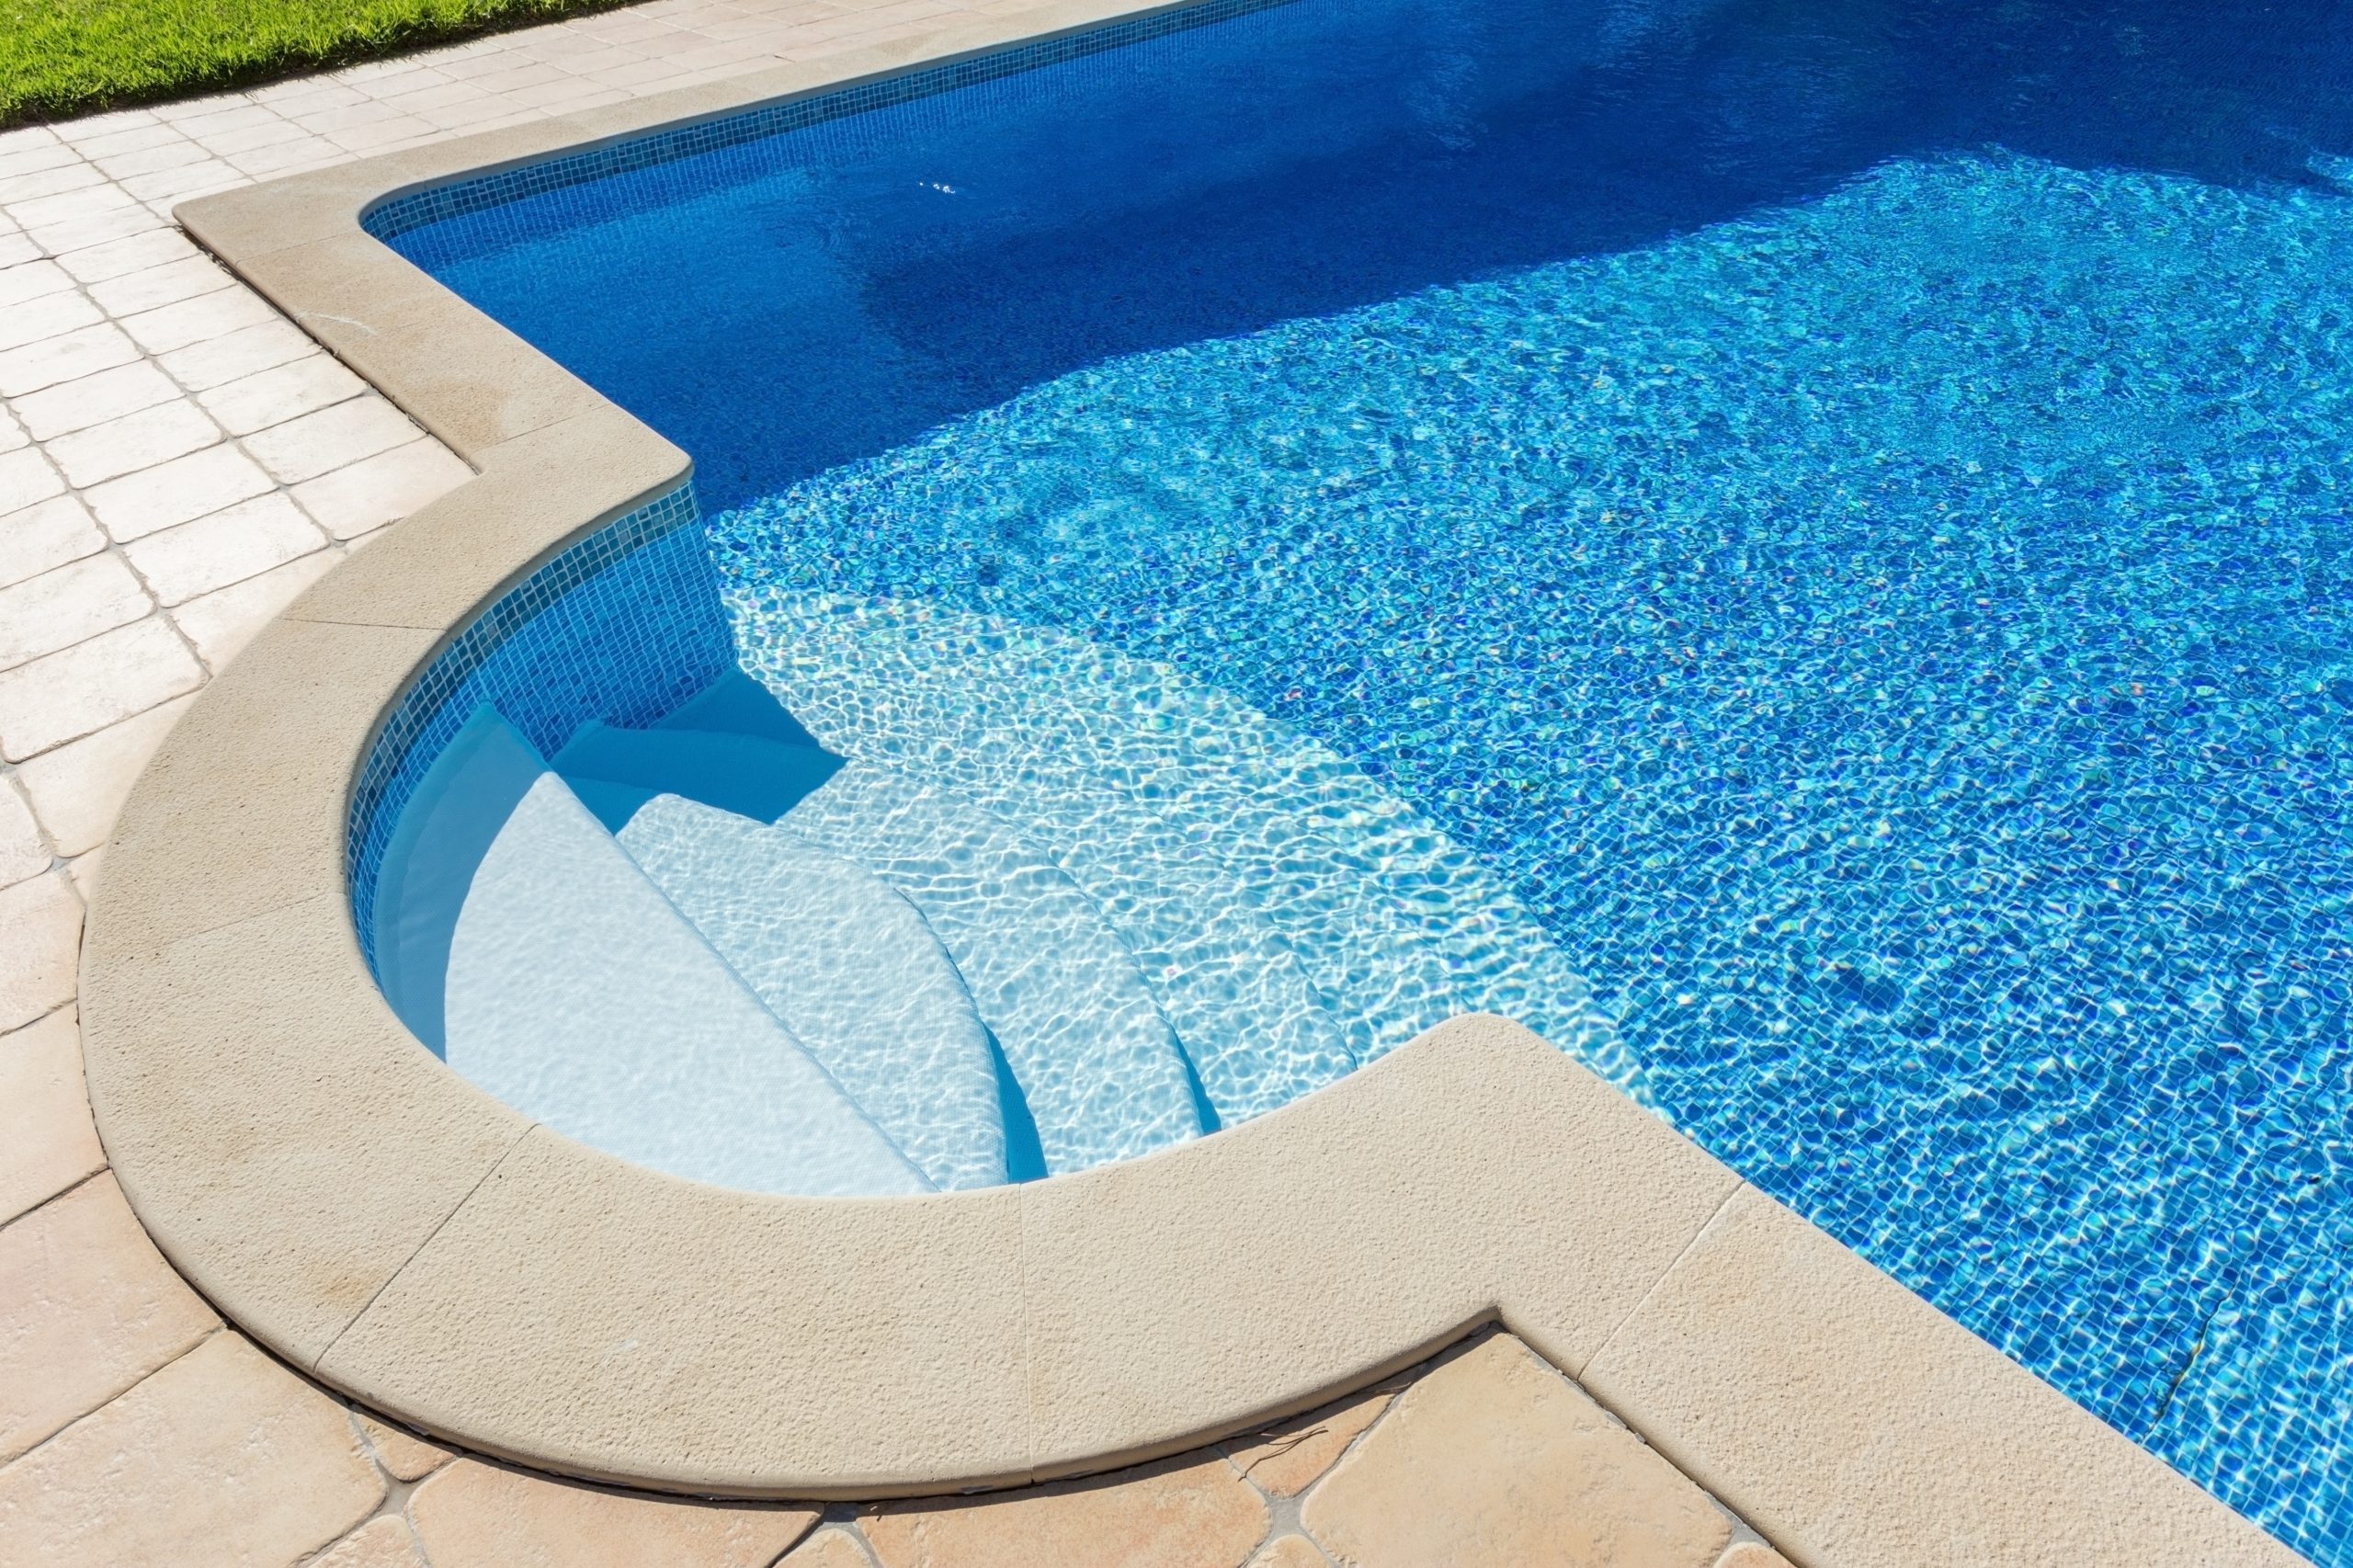 Can't Find Chlorine for Your Pool? Try This Instead